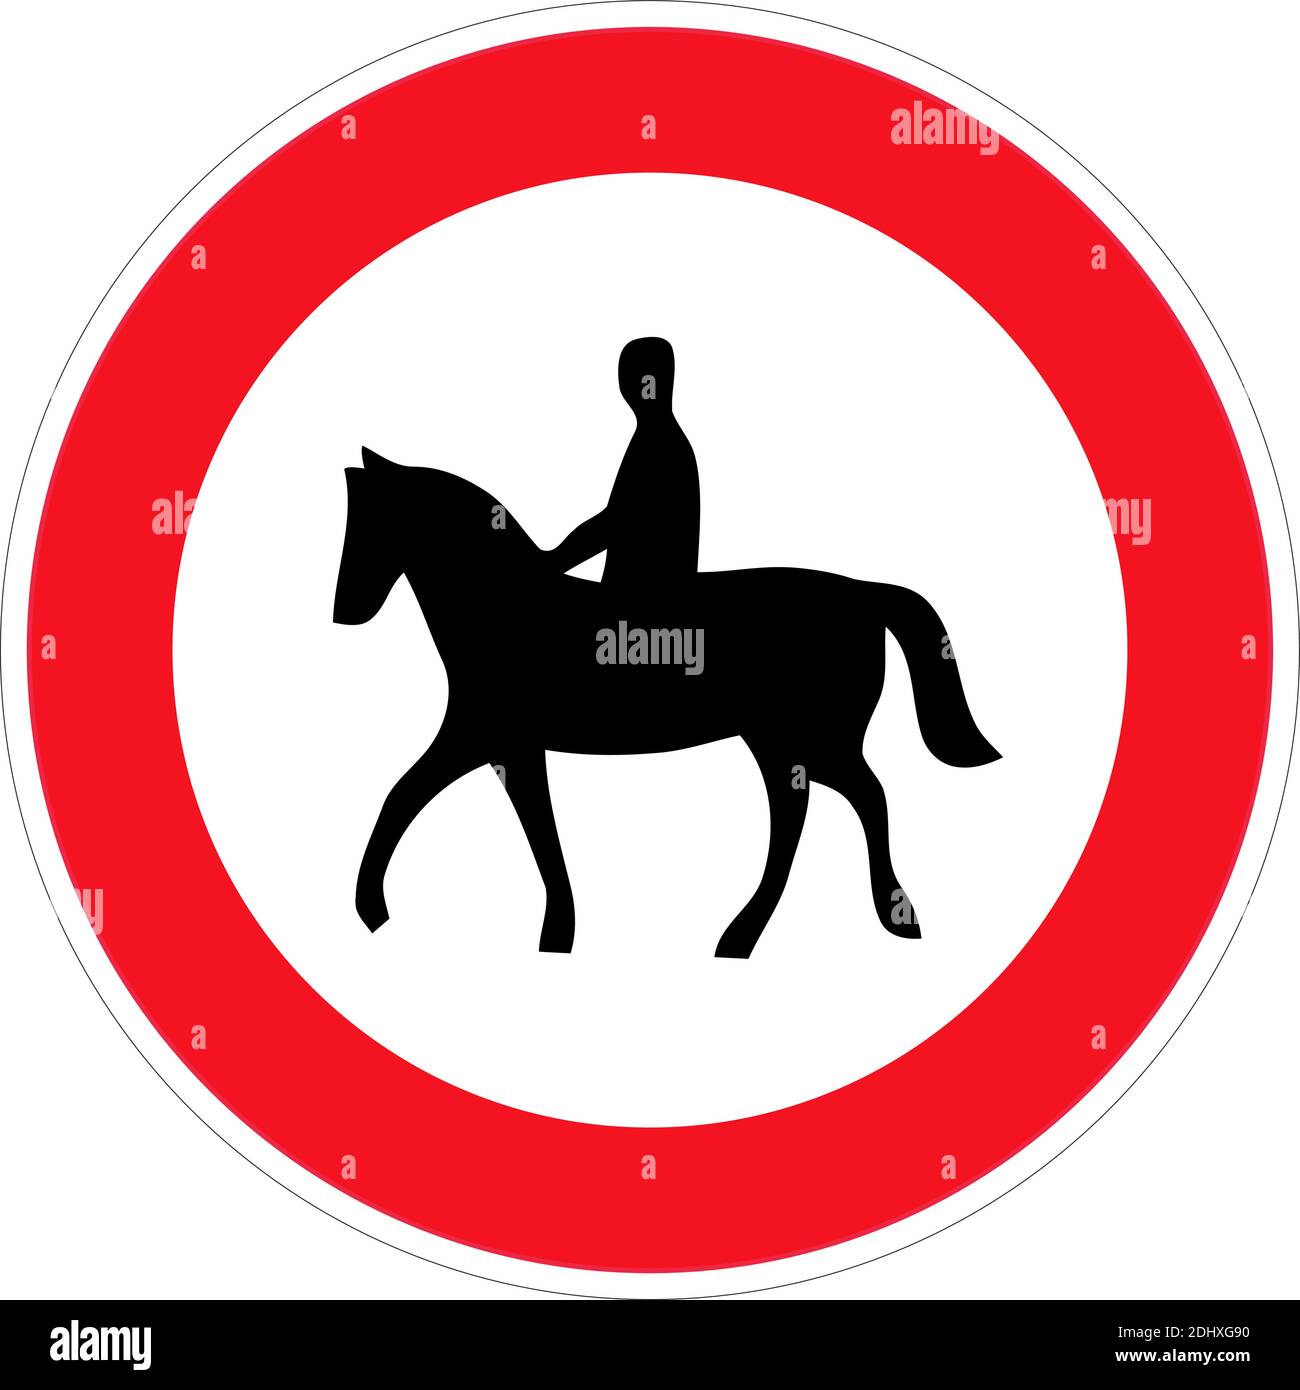 No riding a horse Prohibiting sign not fleeing horses rider Equestrians Do not enter or cross forbidden to entry for jockey Stop road sign, horses are Stock Vector